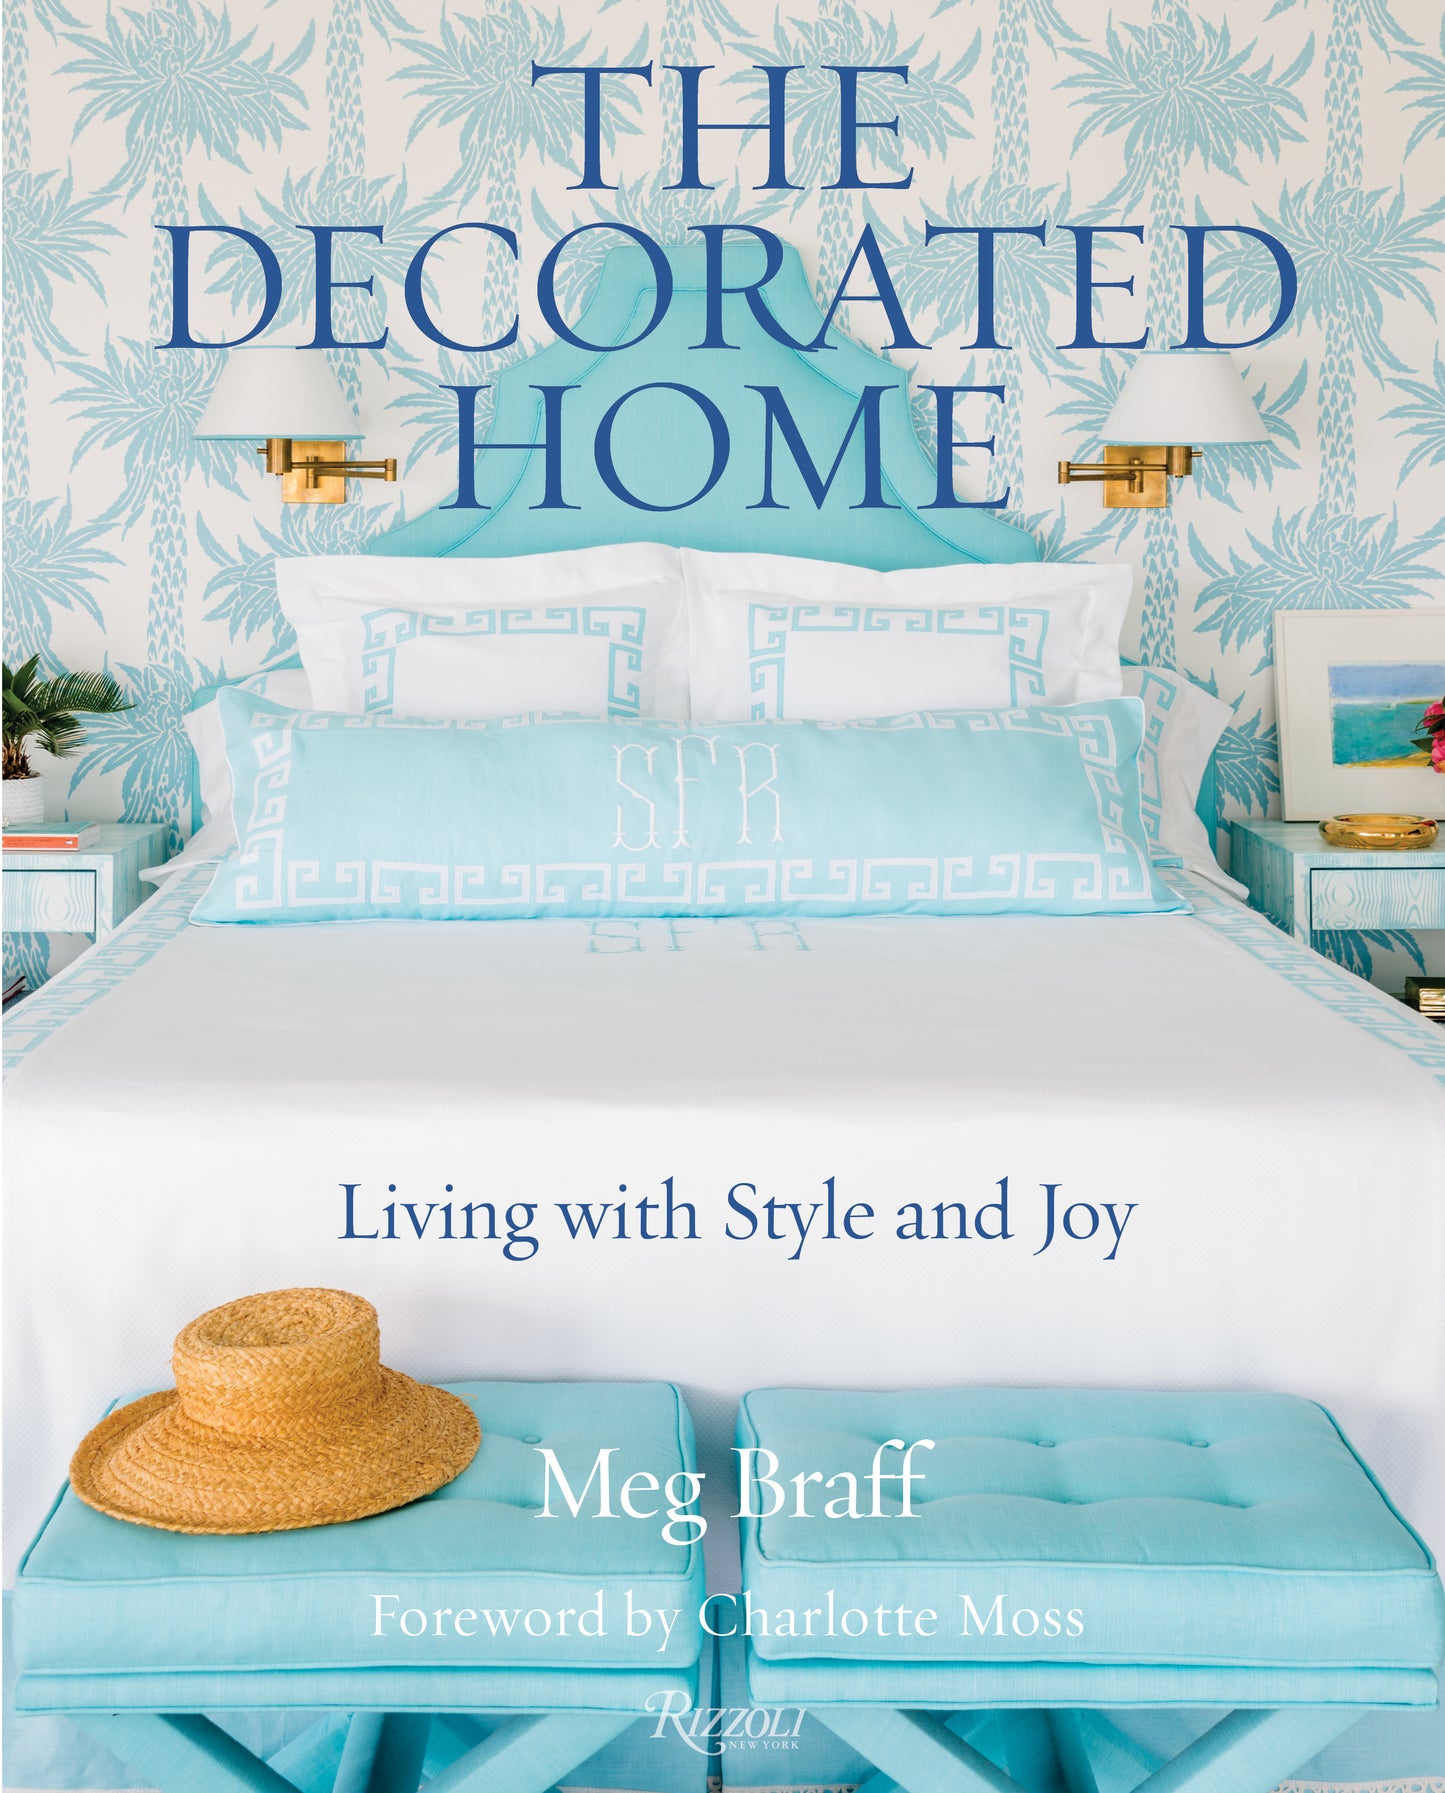 The Decorated Home by Meg Braff